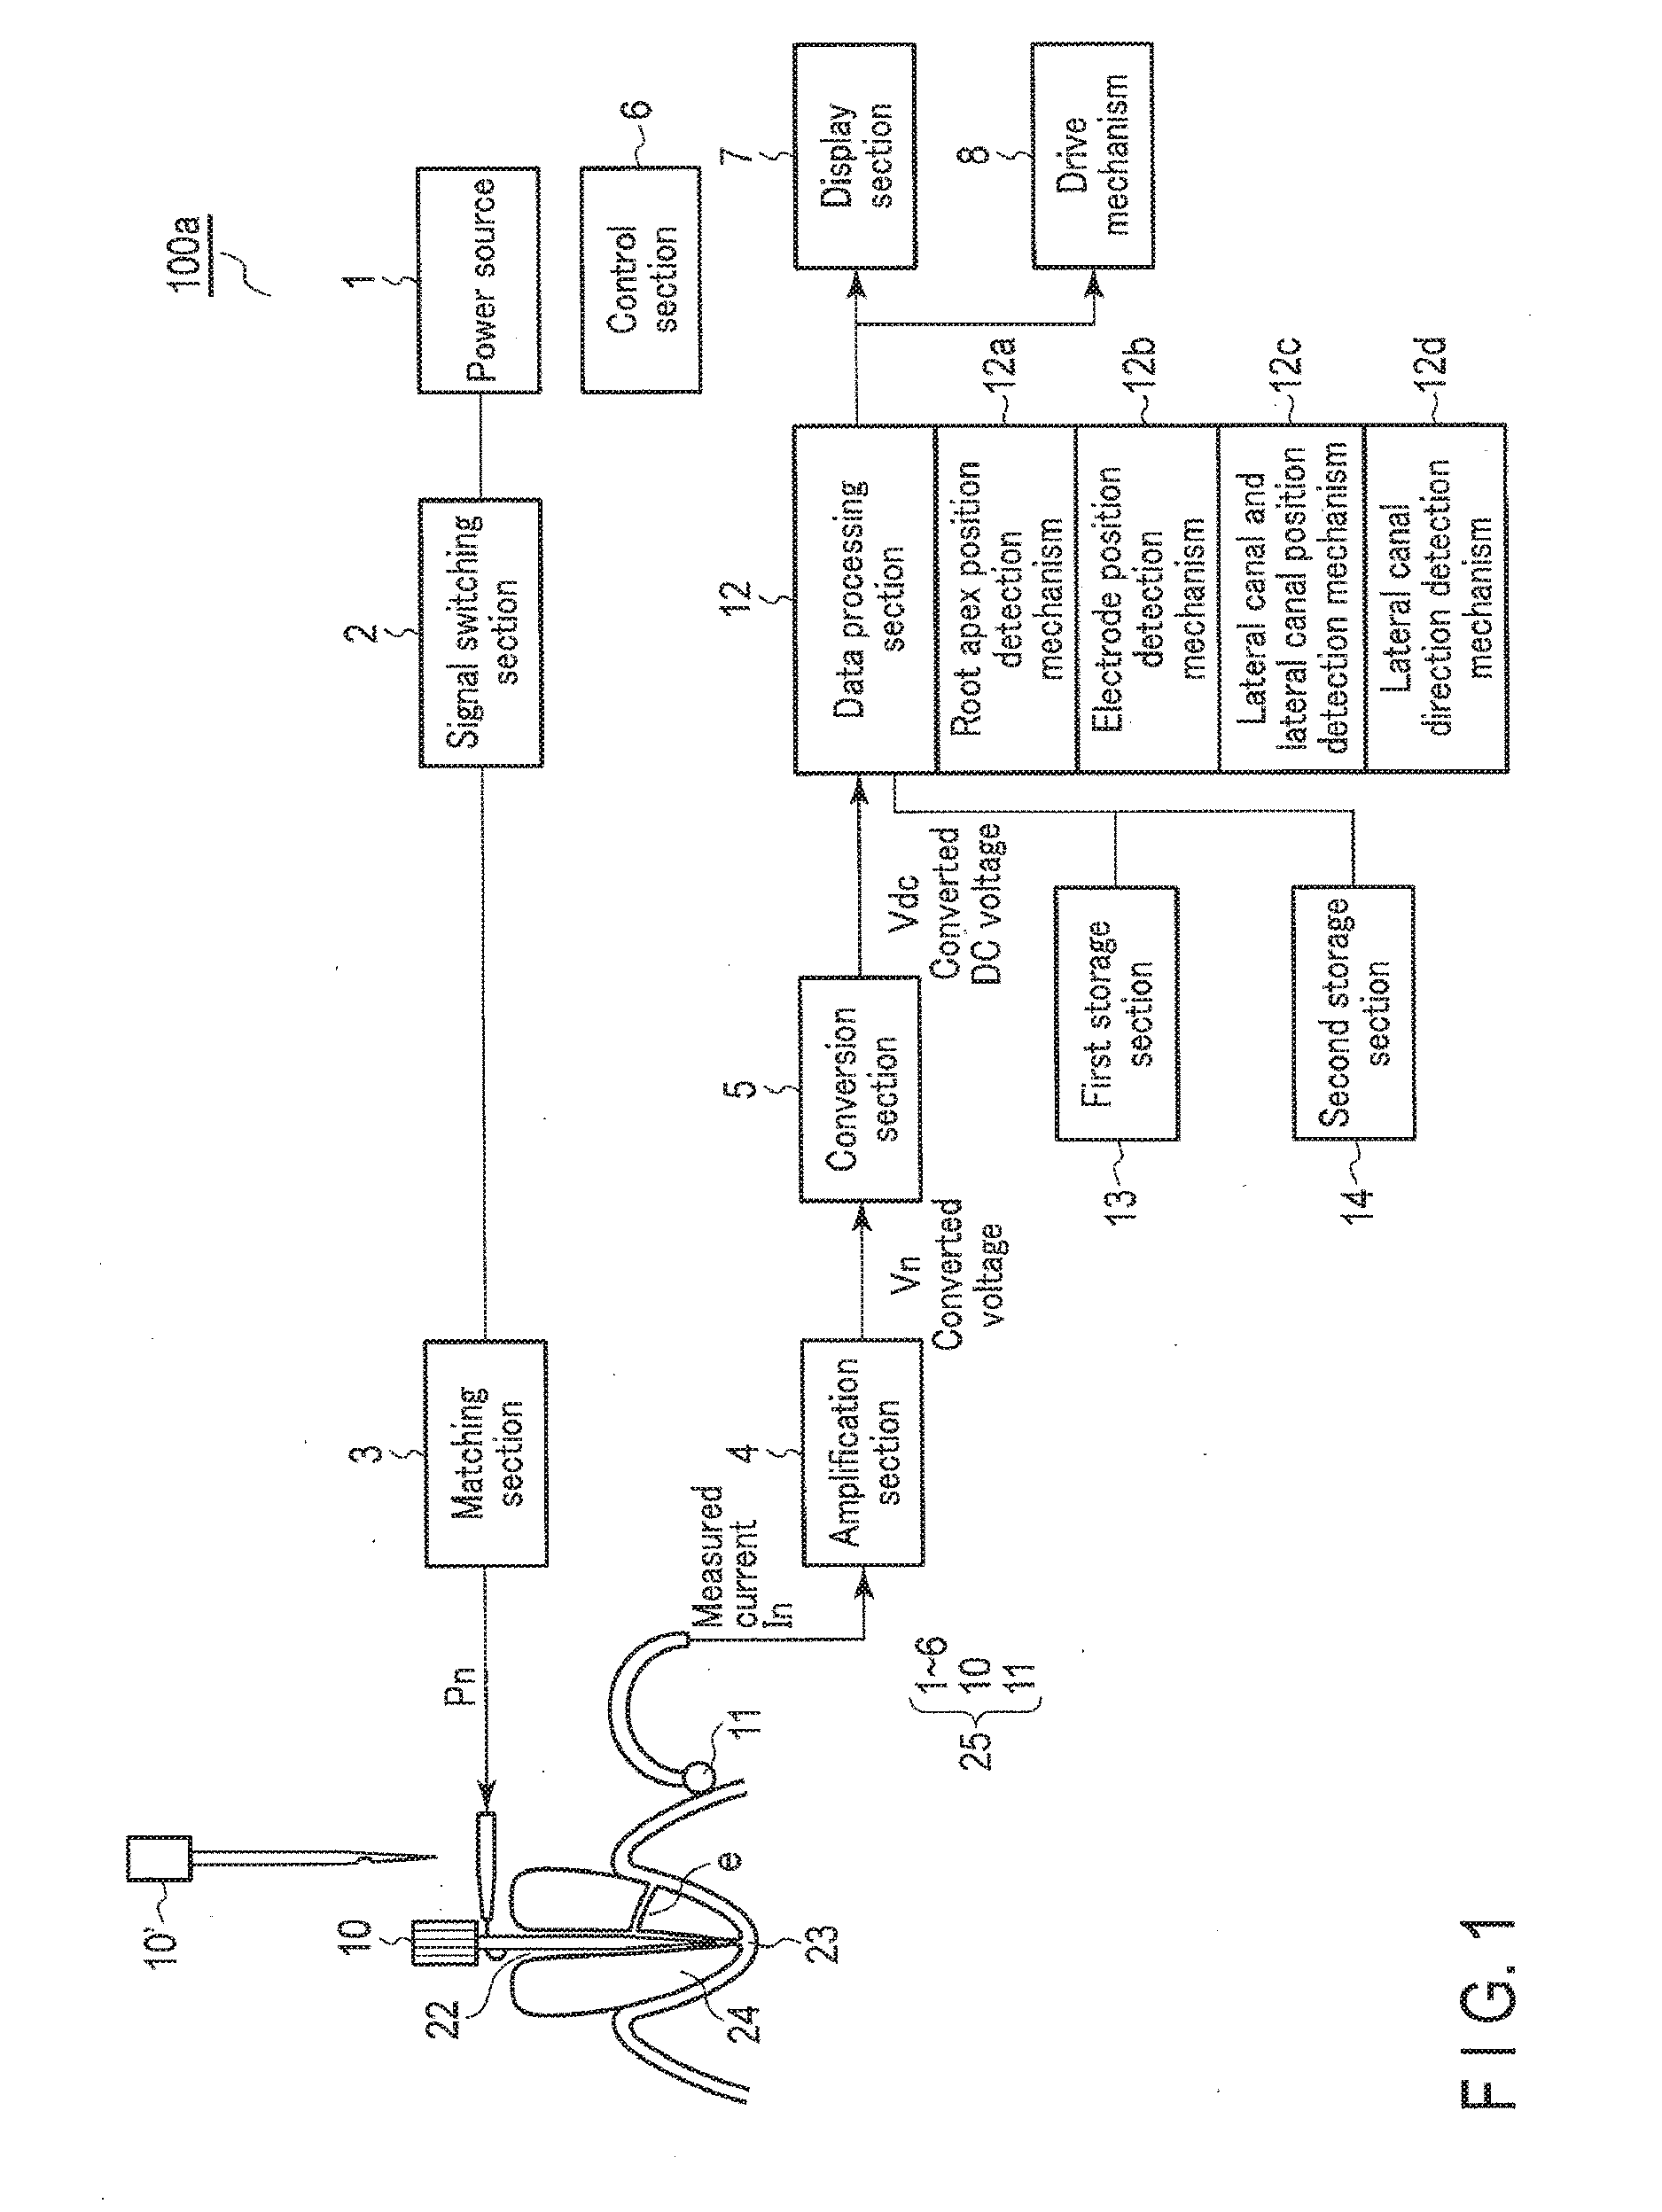 Method of detecting the position of a lateral canal extending from a root canal to a periodontal space, and detecting an opening direction of the lateral canal, apparatus for the same, and a computer readable storage medium storing program to have a computer execute the method